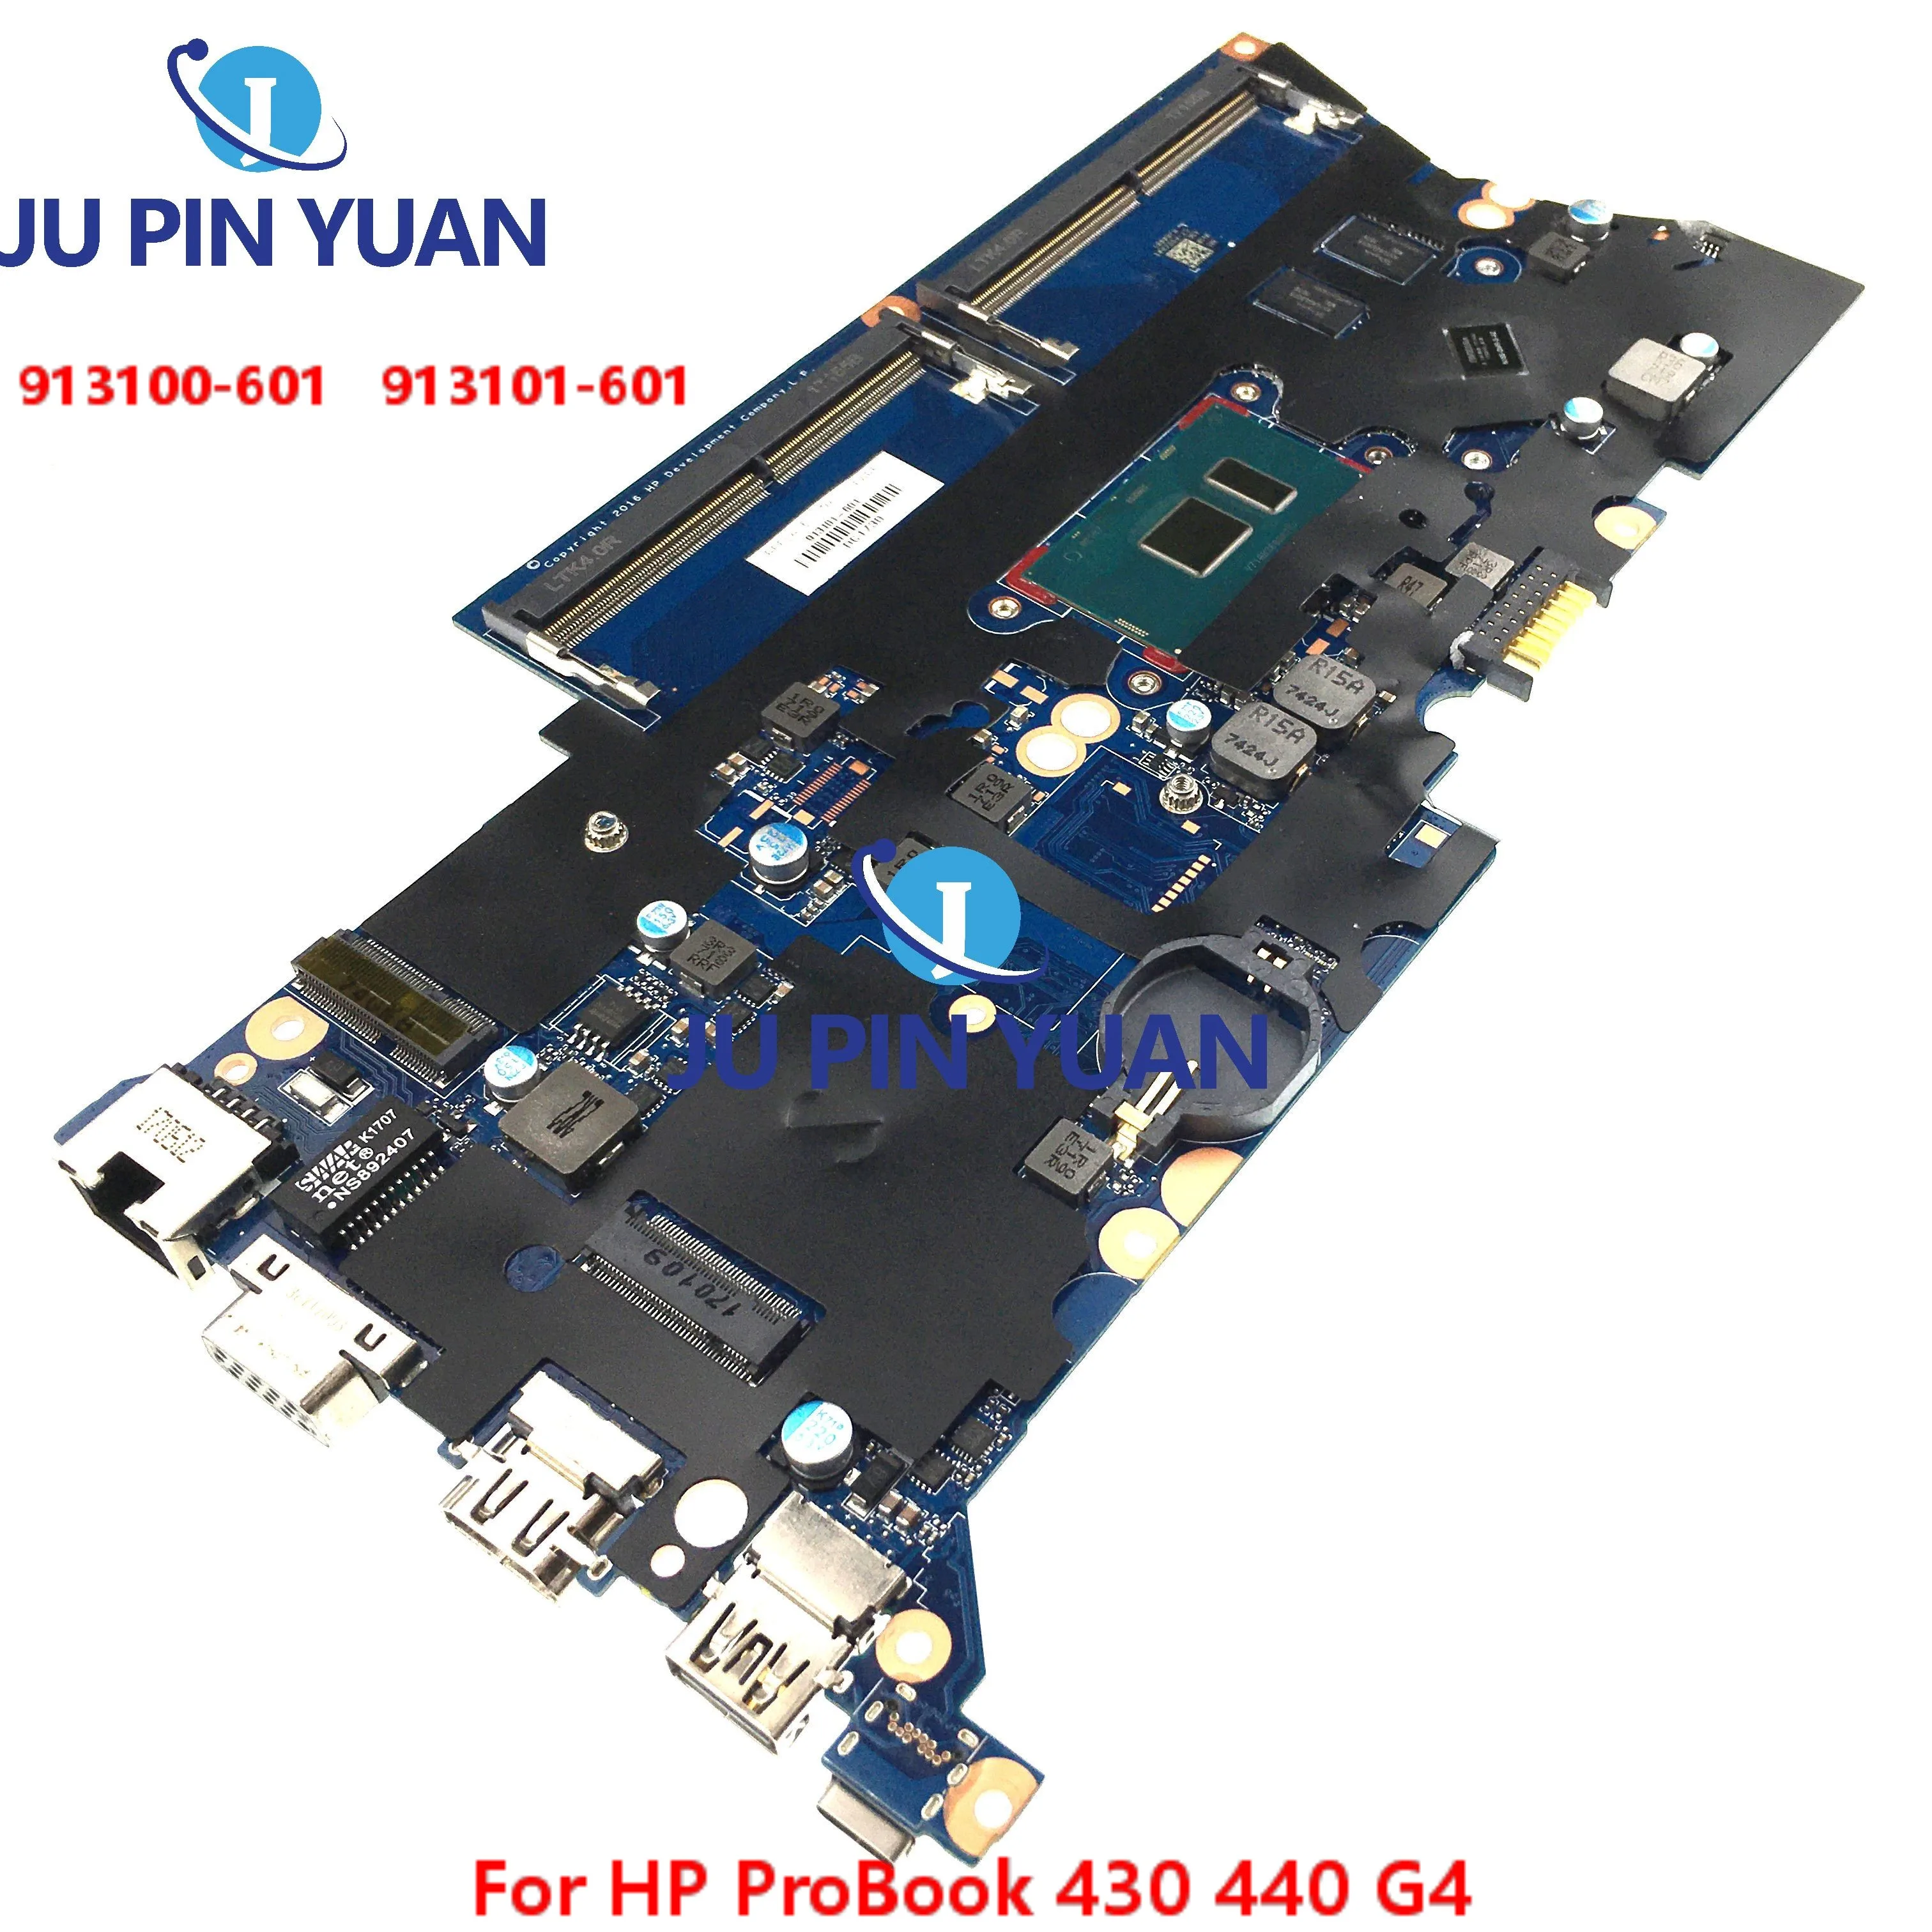 

For HP ProBook 430 440 G4 Laptop Motherboard 913101-001 913100-601 Mainboard 913101-601 913100-001 DA0X81MB6E0 100% Tested